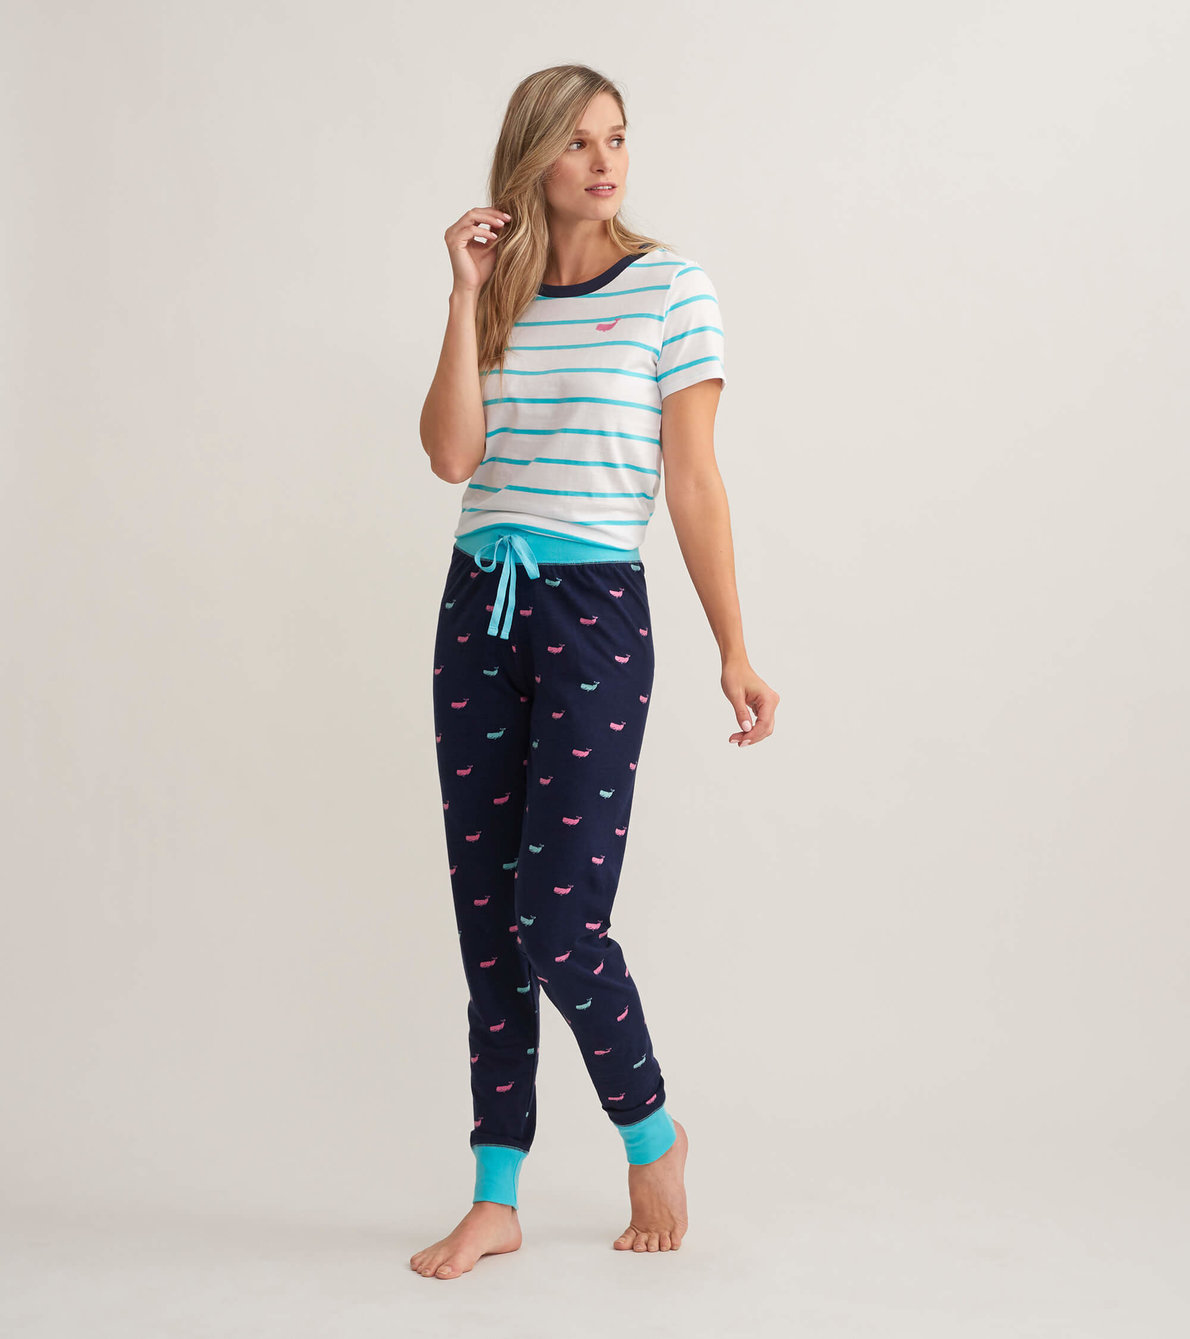 View larger image of Nautical Whales Women's Tee and Leggings Pajama Separates